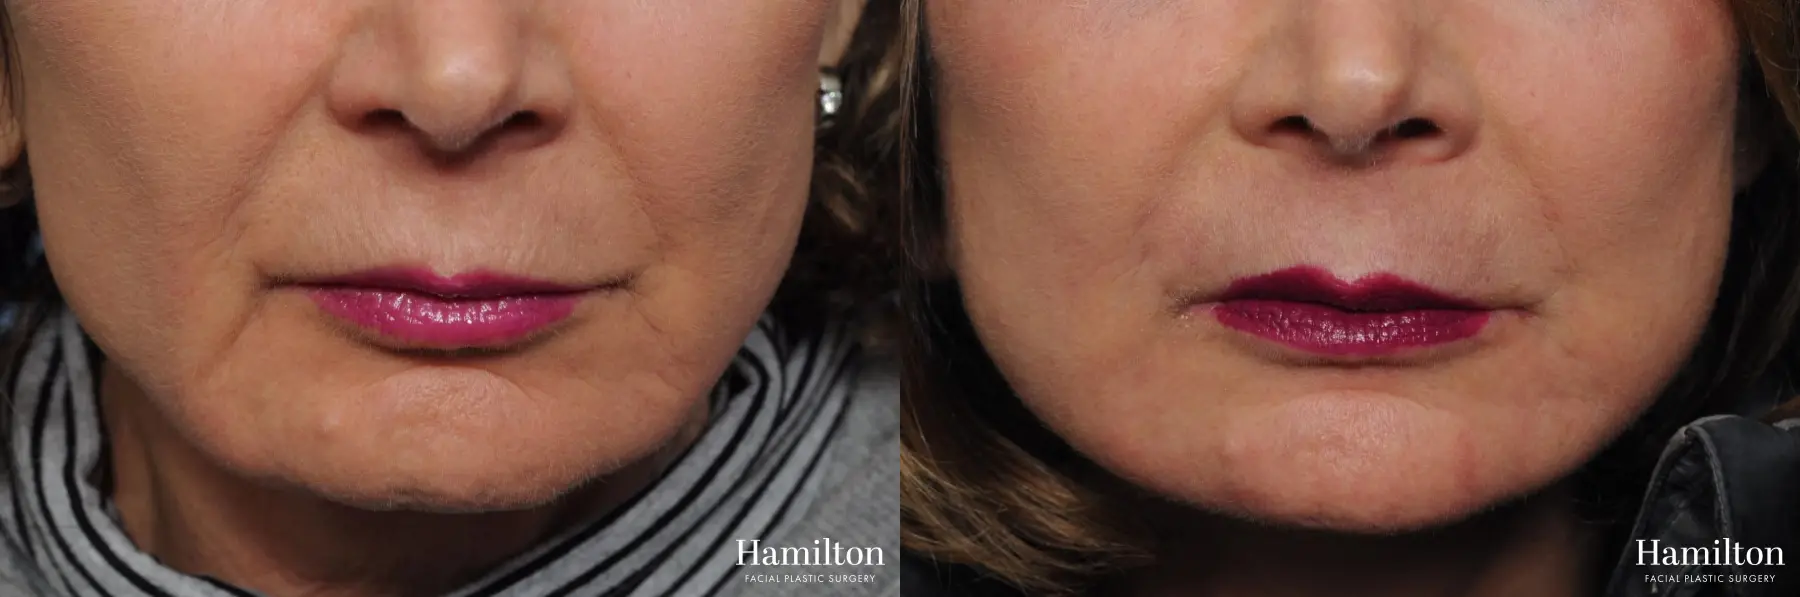 Sciton Laser: Patient 2 - Before and After 1